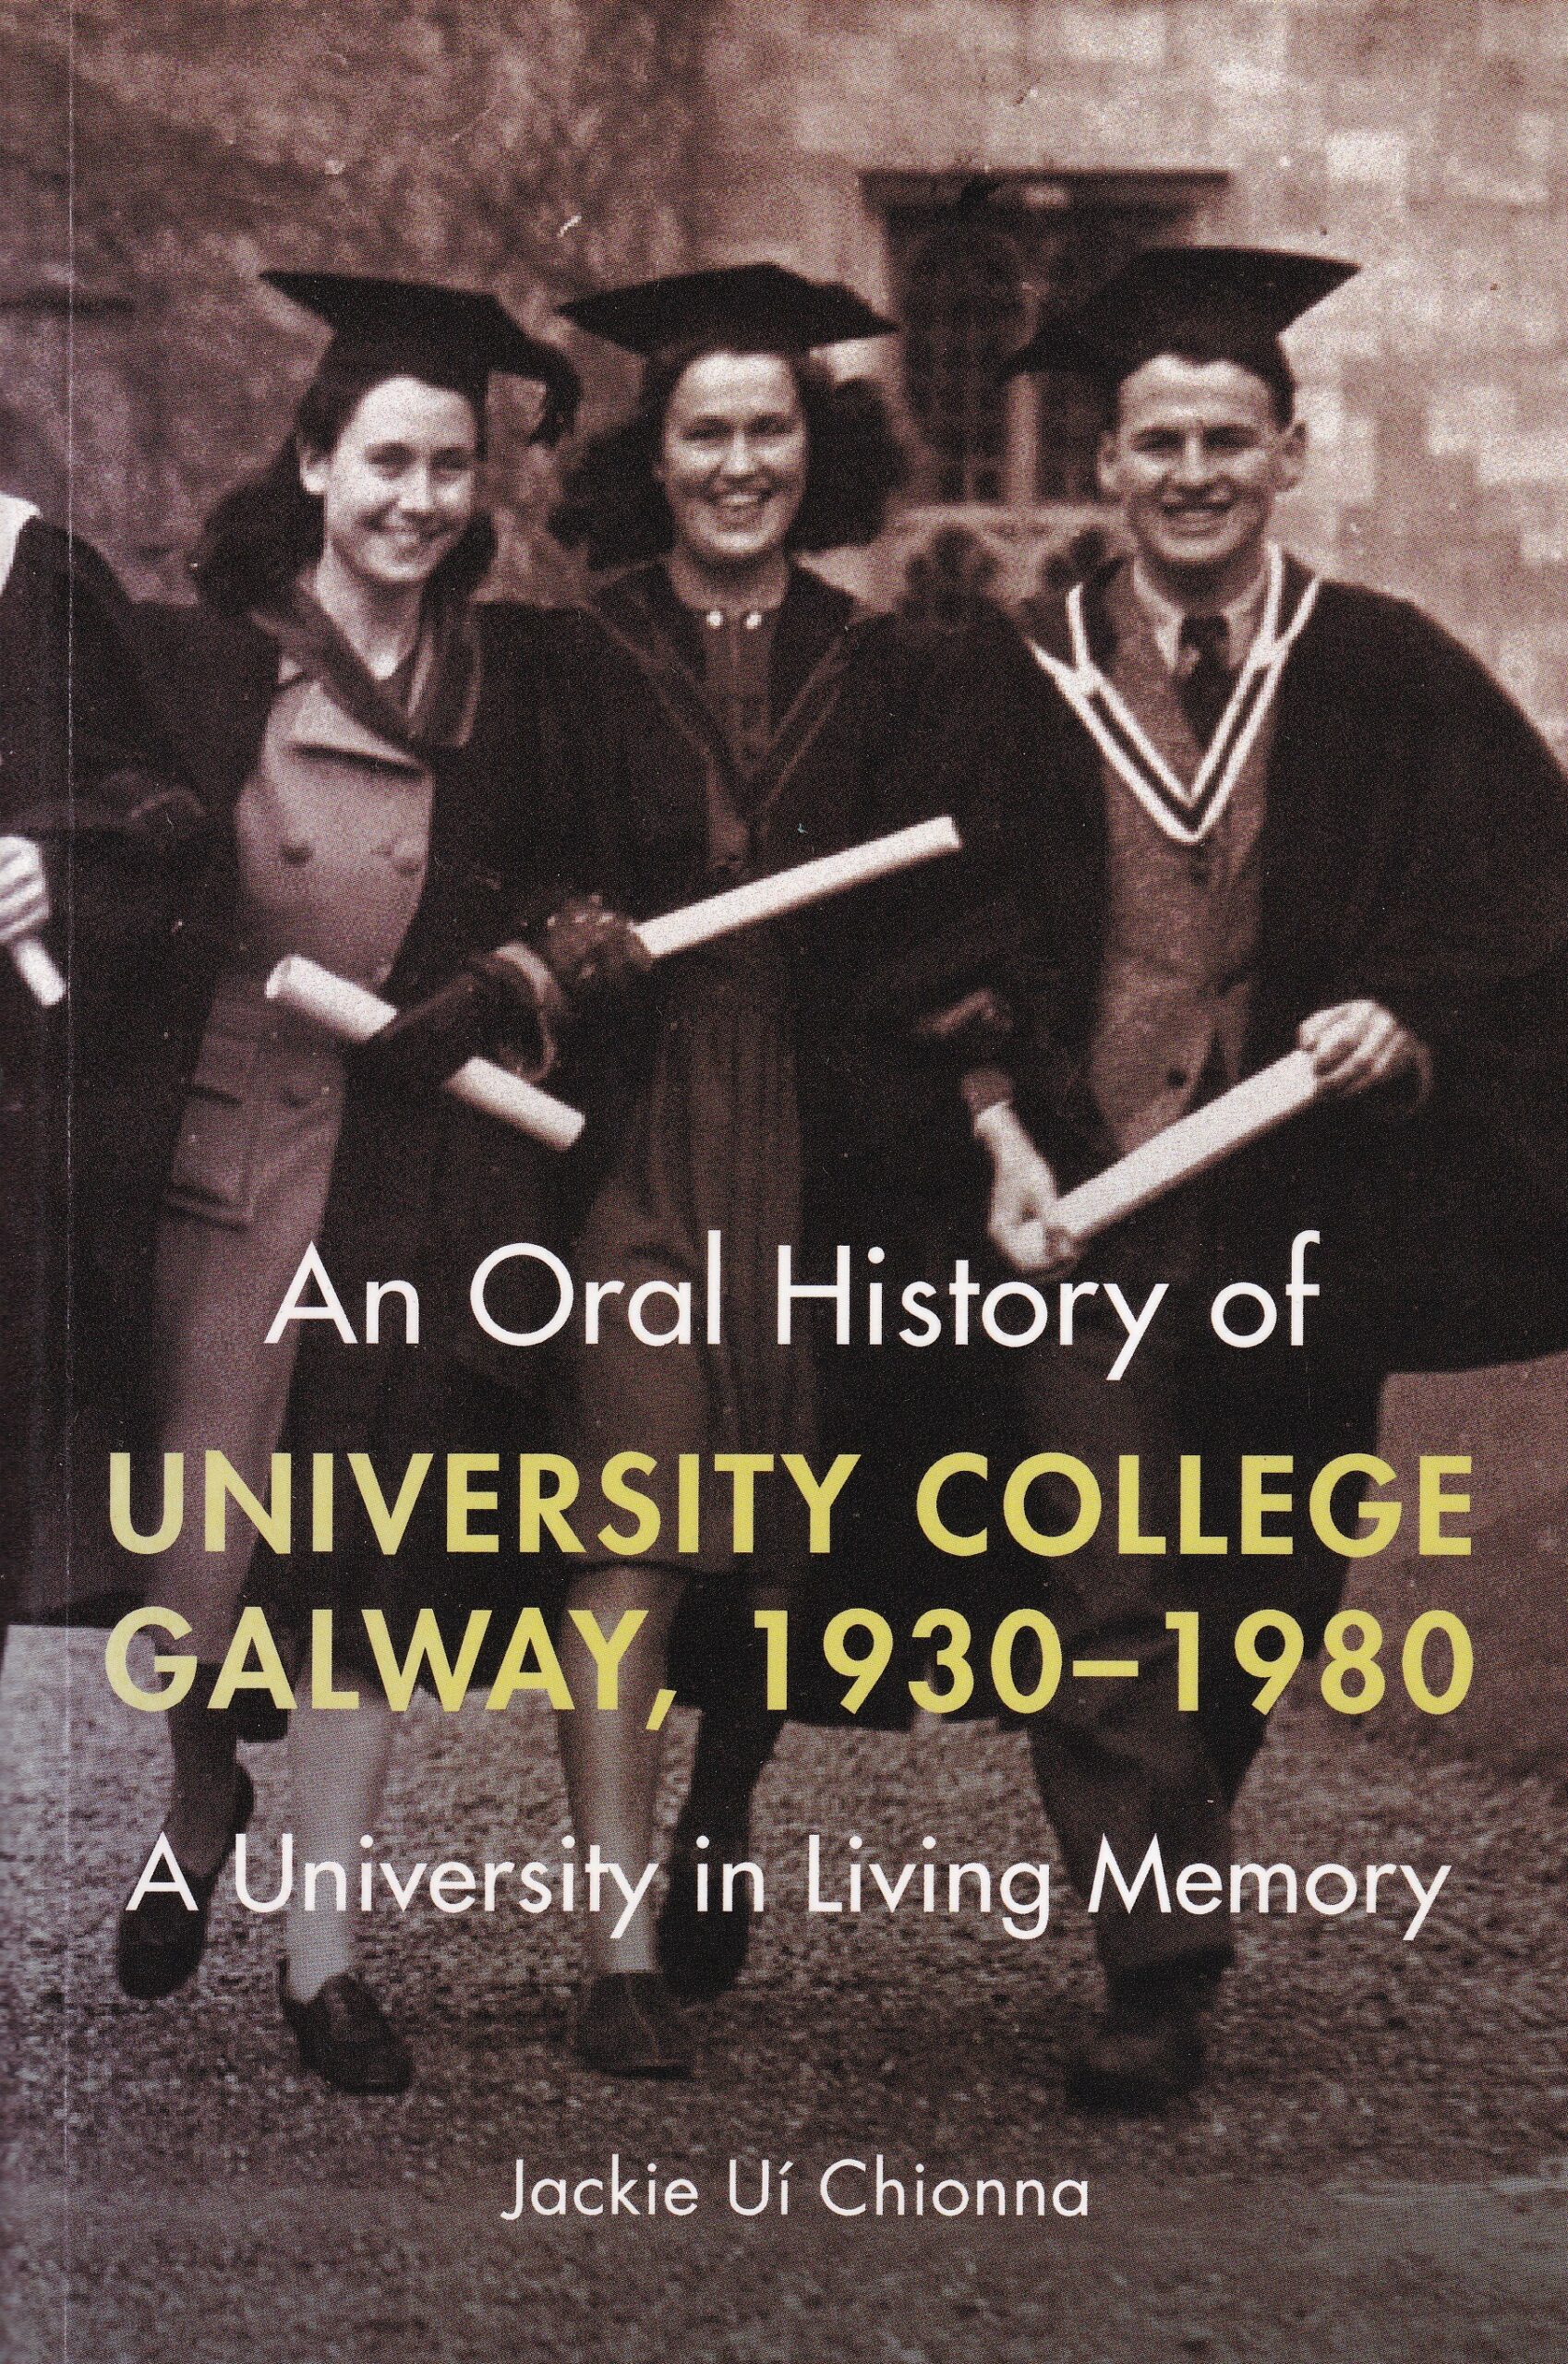 An Oral History of University College Galway, 1930-1980: A University in Living Memory | Jackie Uí Chionna | Charlie Byrne's